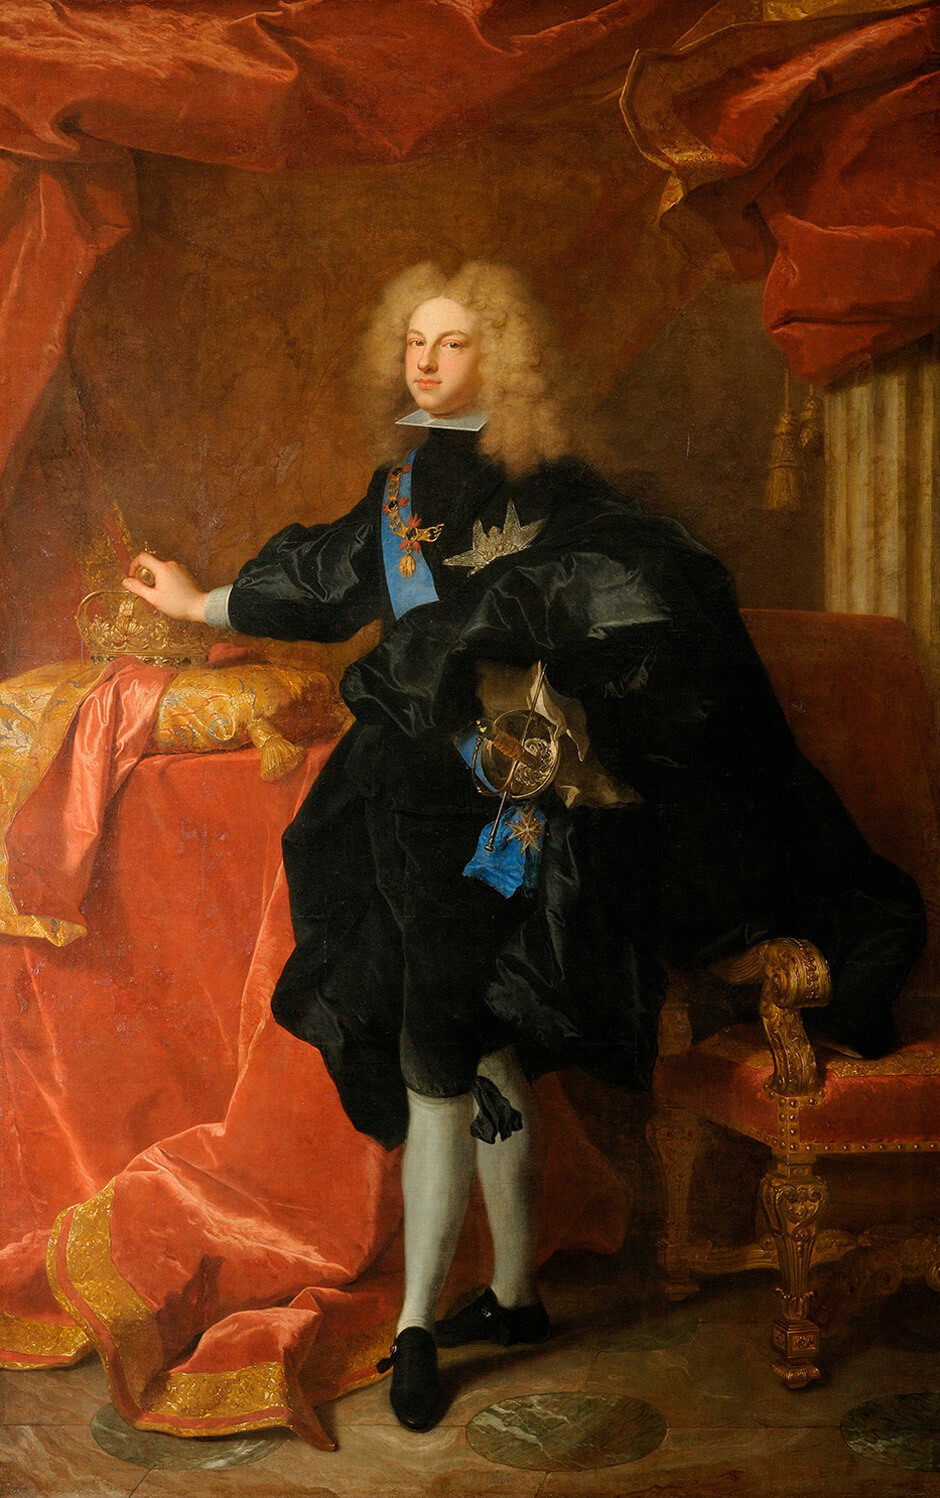 Art Canada Institute, Louis Nicolas, Philip V, King of Spain (Philippe V, roi d’Espagne), 1701, by Hyacinthe Rigaud